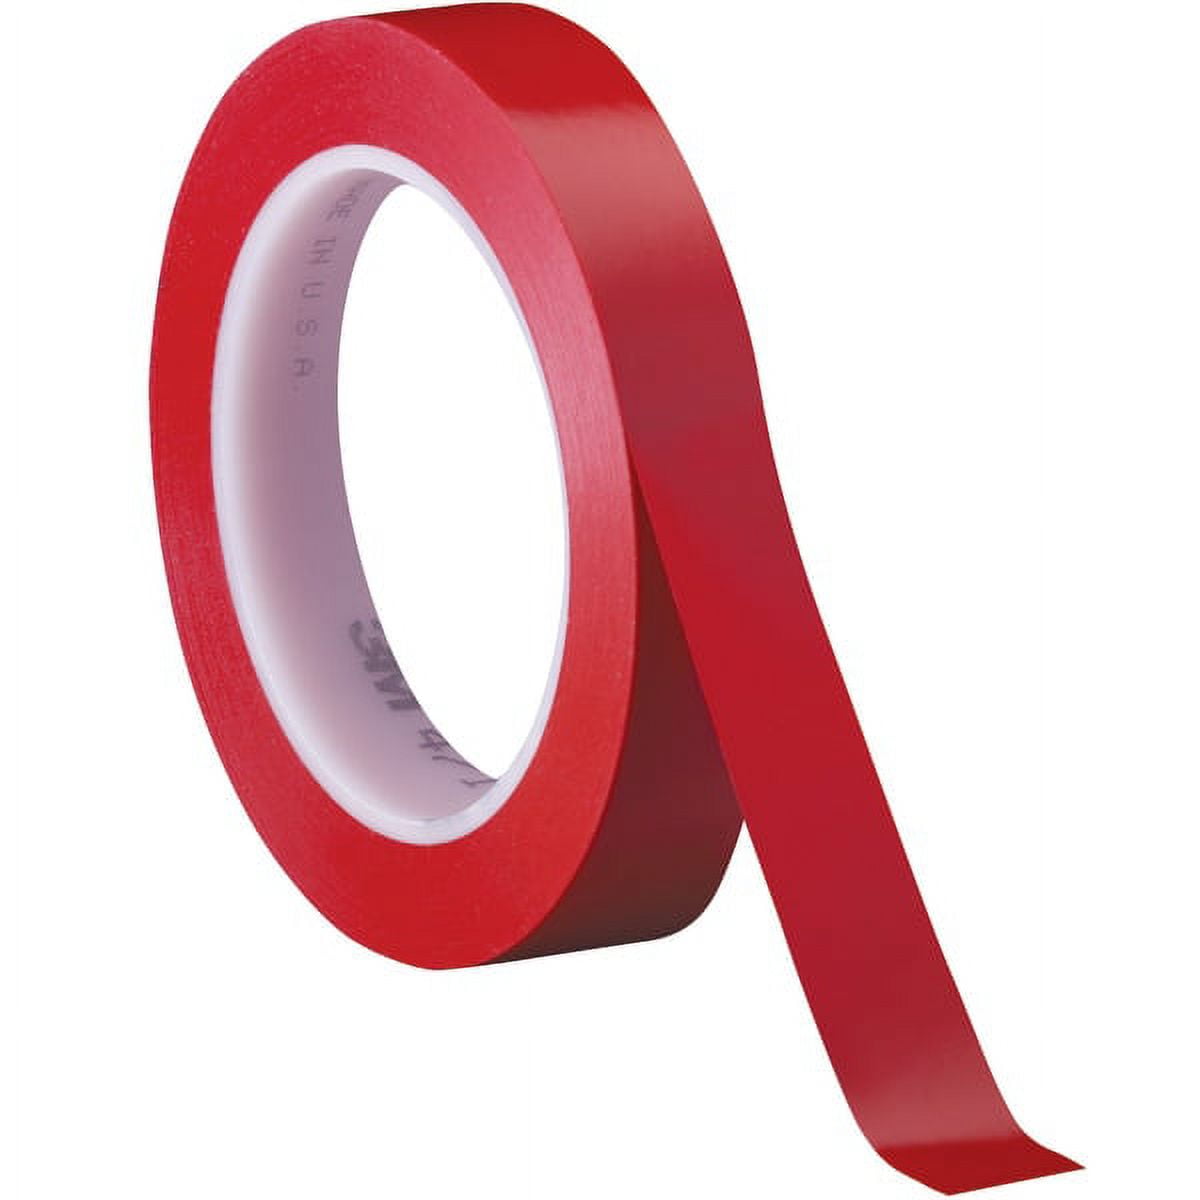 T9644713pkr 0.75 In. X 36 Yards Red 471 Vinyl Tape, Red - Pack Of 3